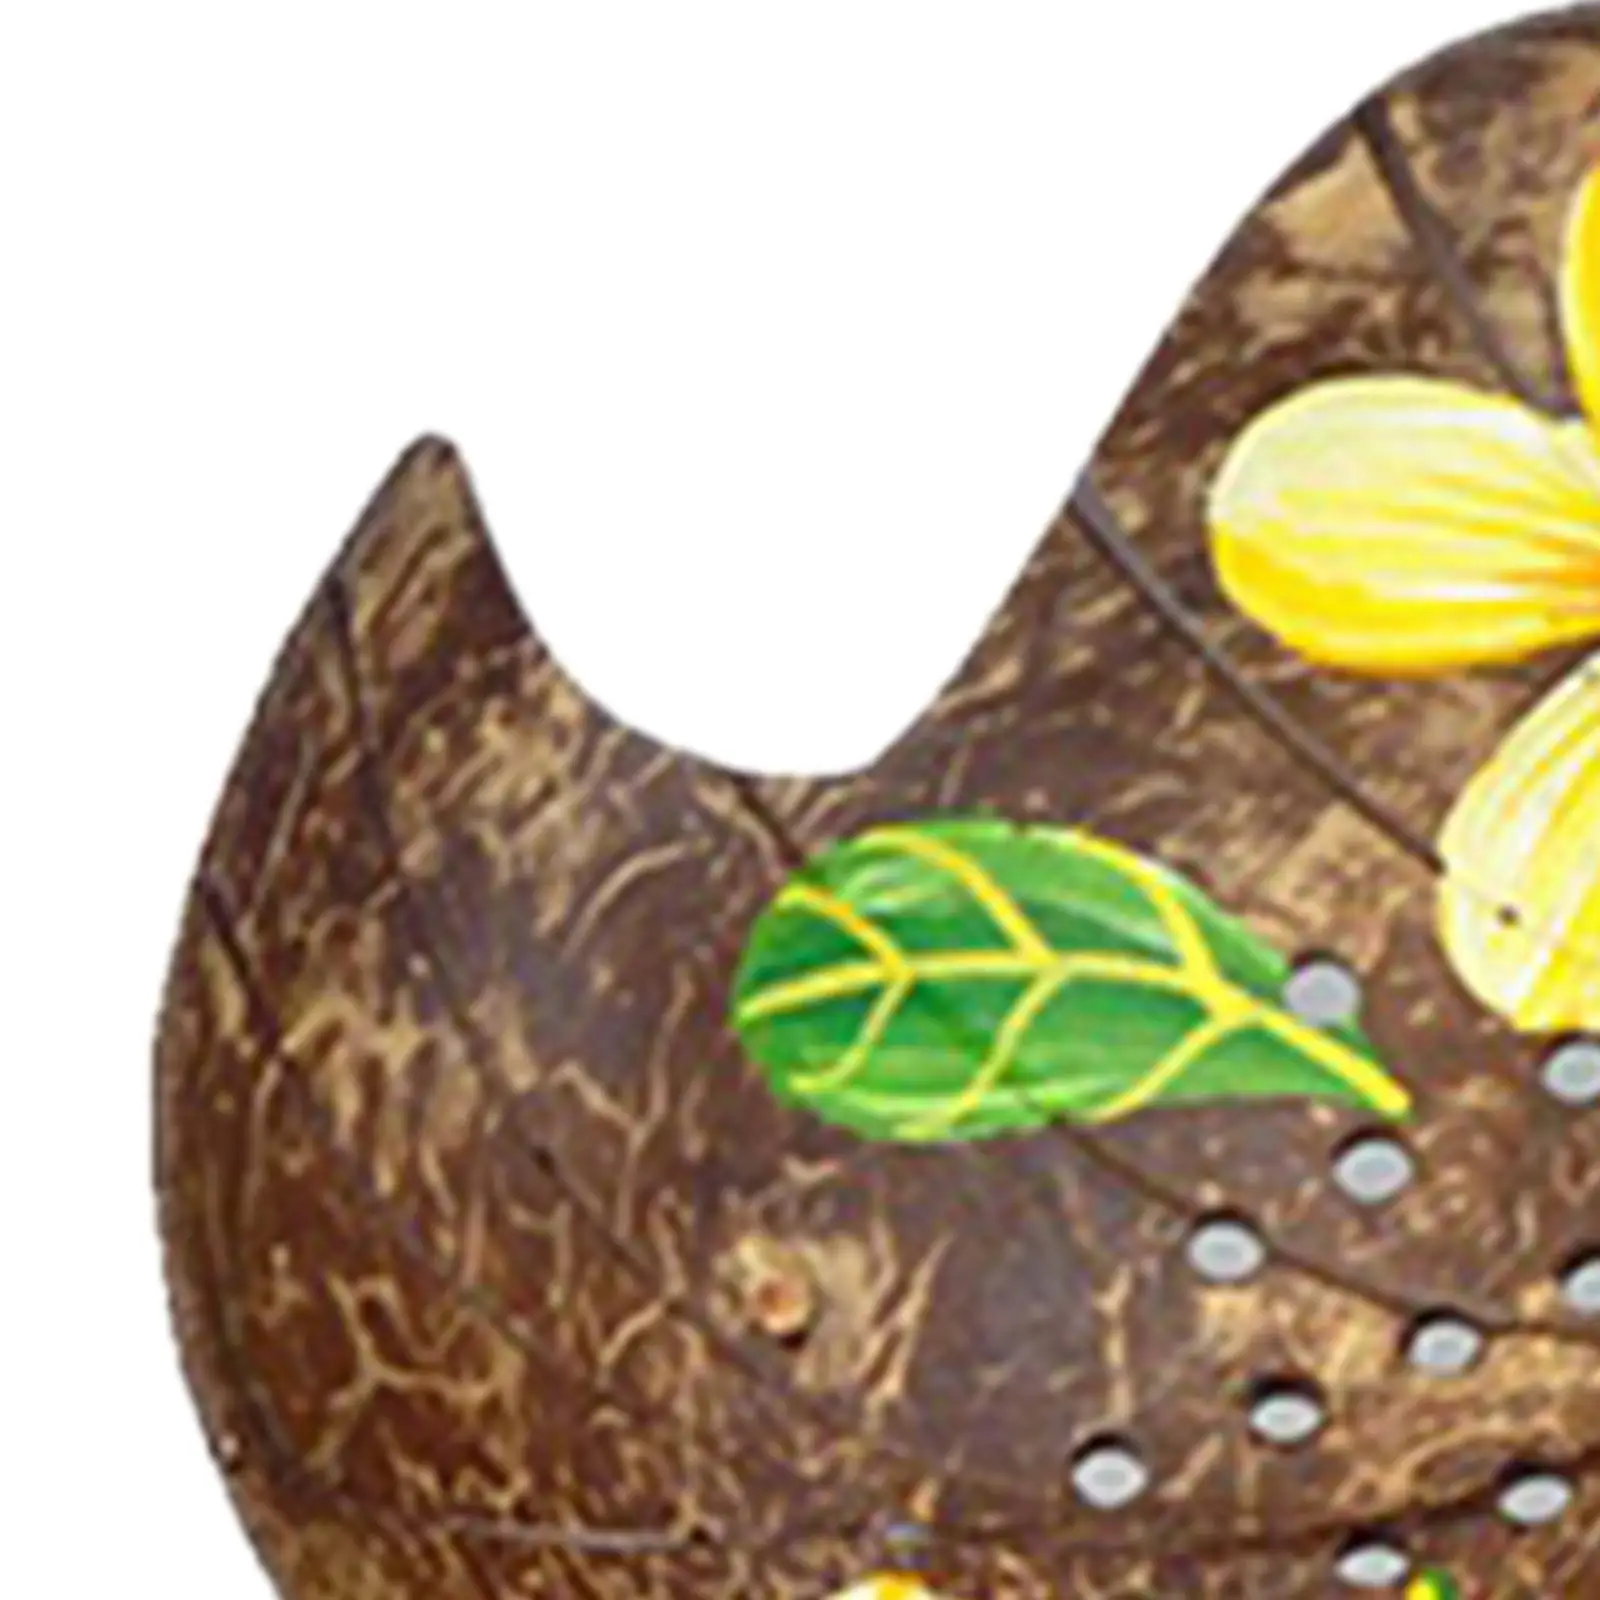 Coconut Shell Soap Dish Novelty Shower Soap Holder Jewelry Holder for Kitchen Household Countertop Bathroom Supplies